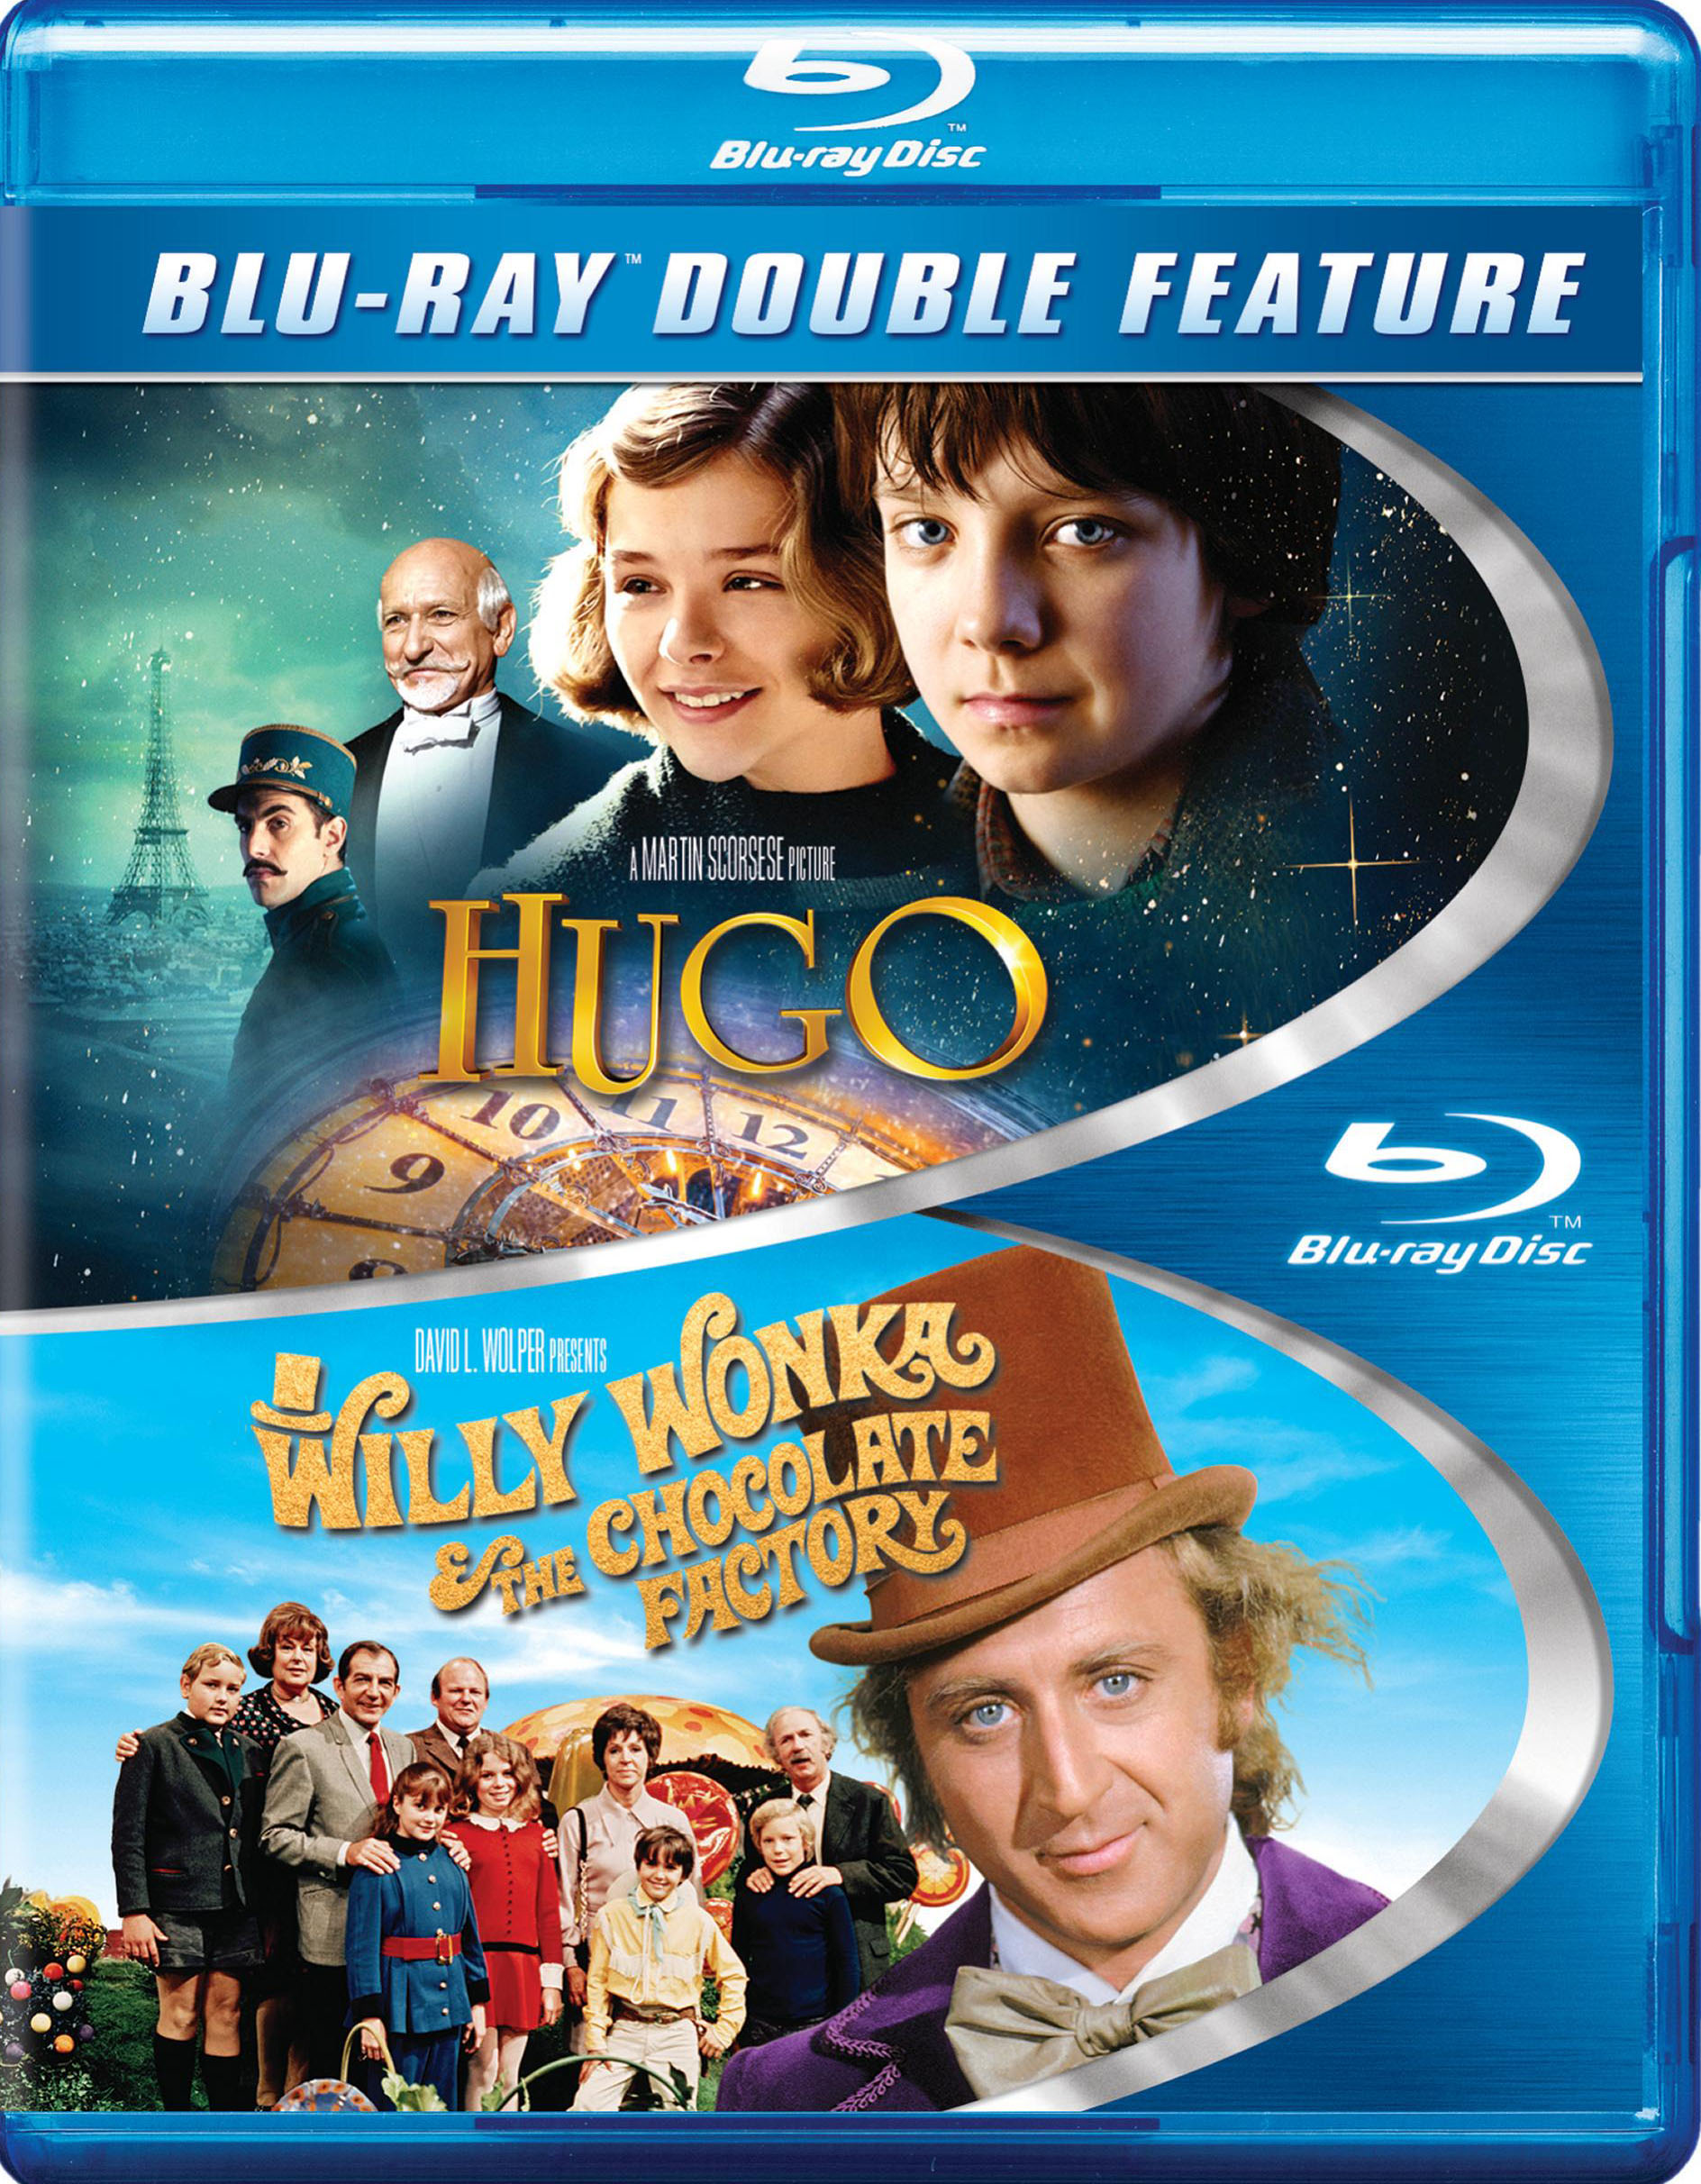 Willy Wonka and the Chocolate Factory - Blu-Ray